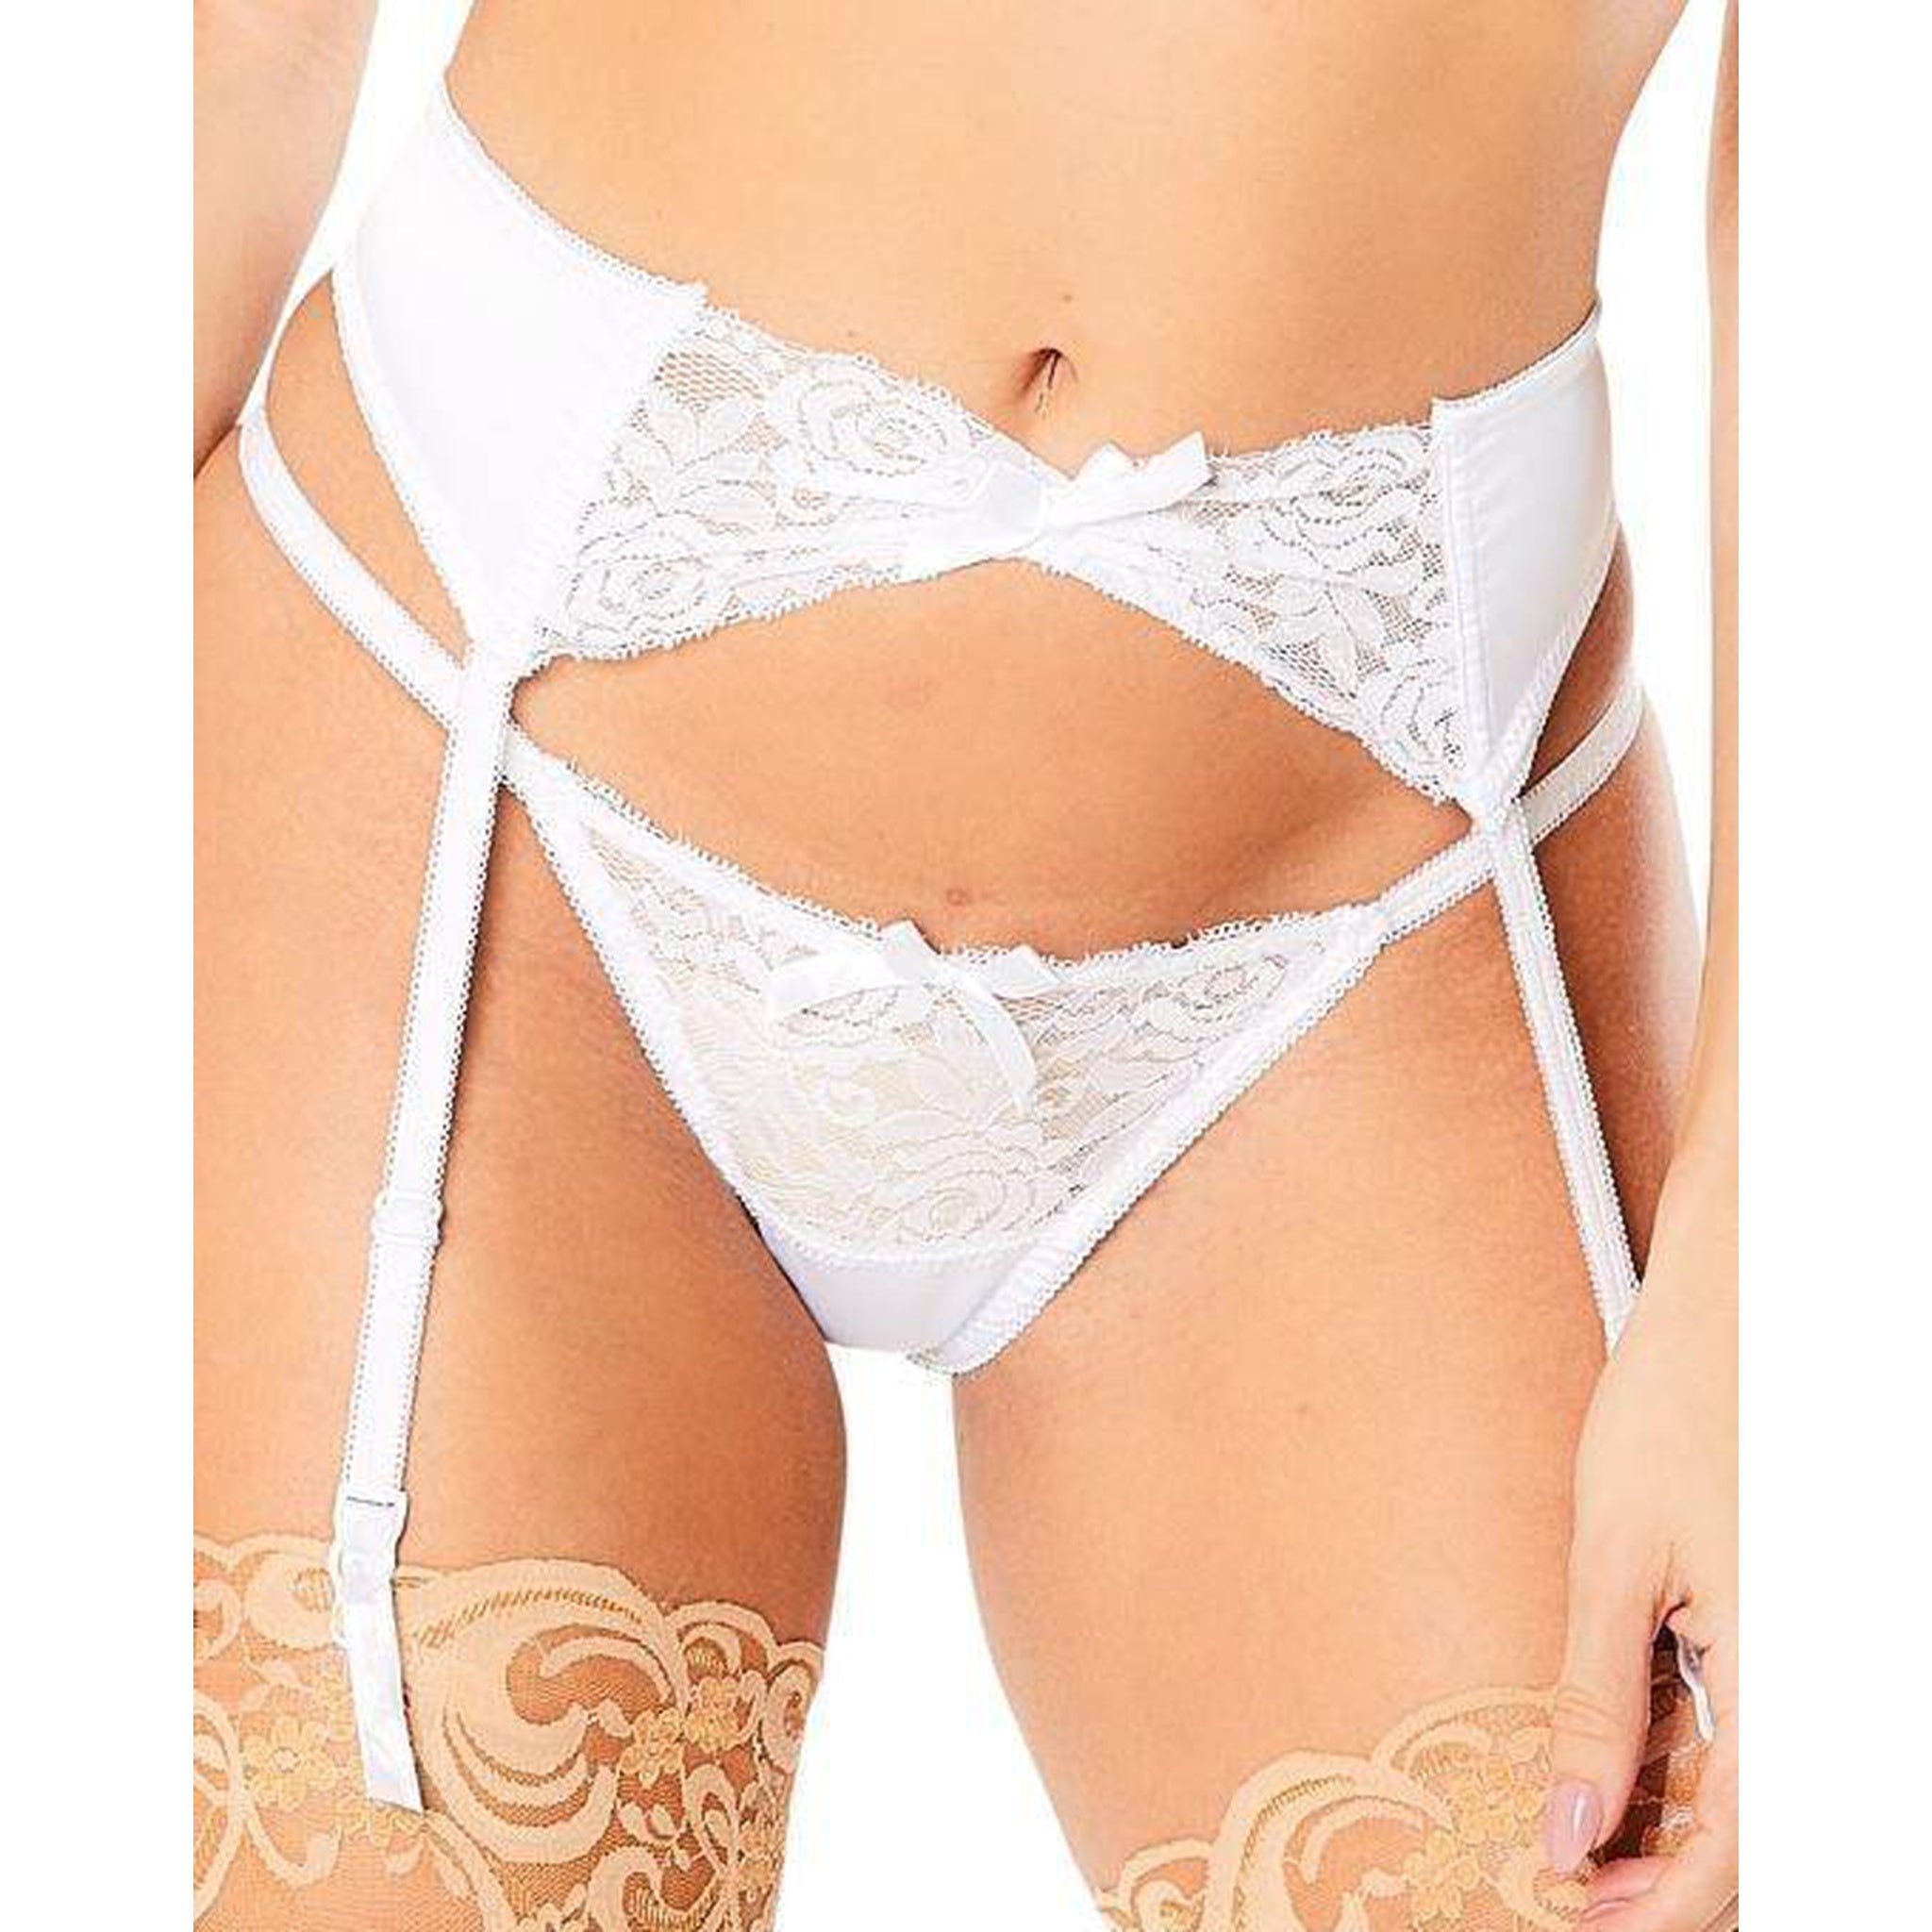 The Perky Lady White Satin Garter Belt with Lace Detailing